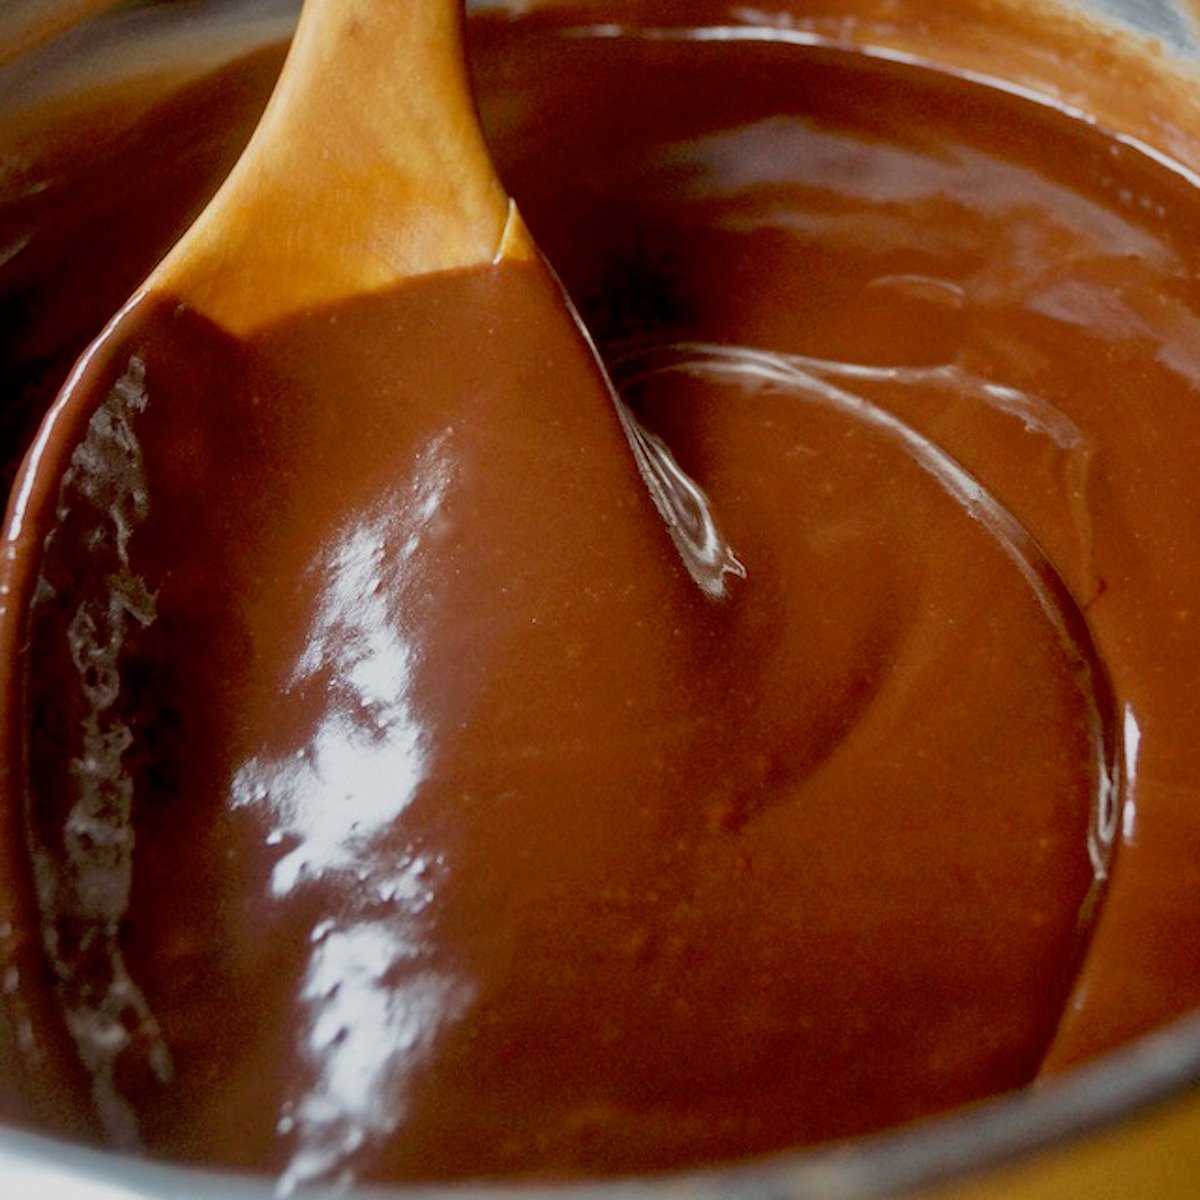 Chocolate ganache in a bowl with a wooden spoon.